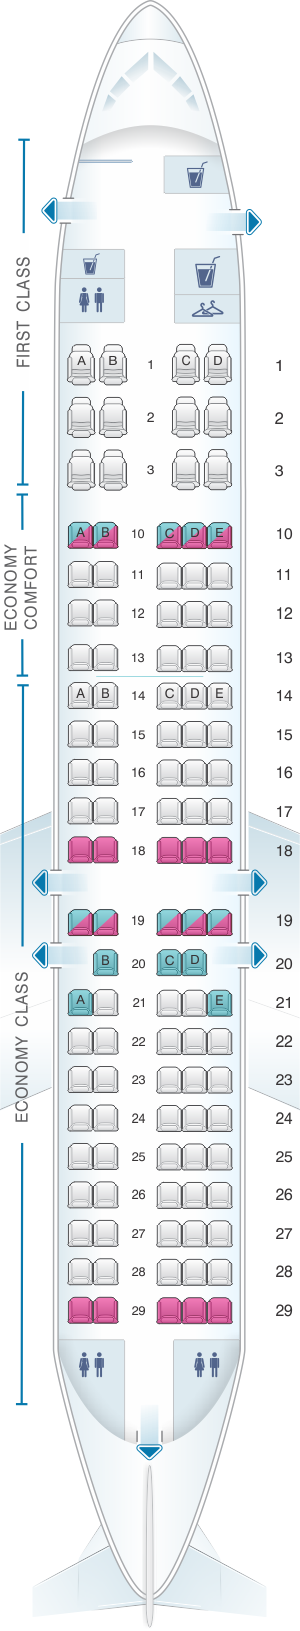 Seat map for Delta Air Lines Boeing B717 200